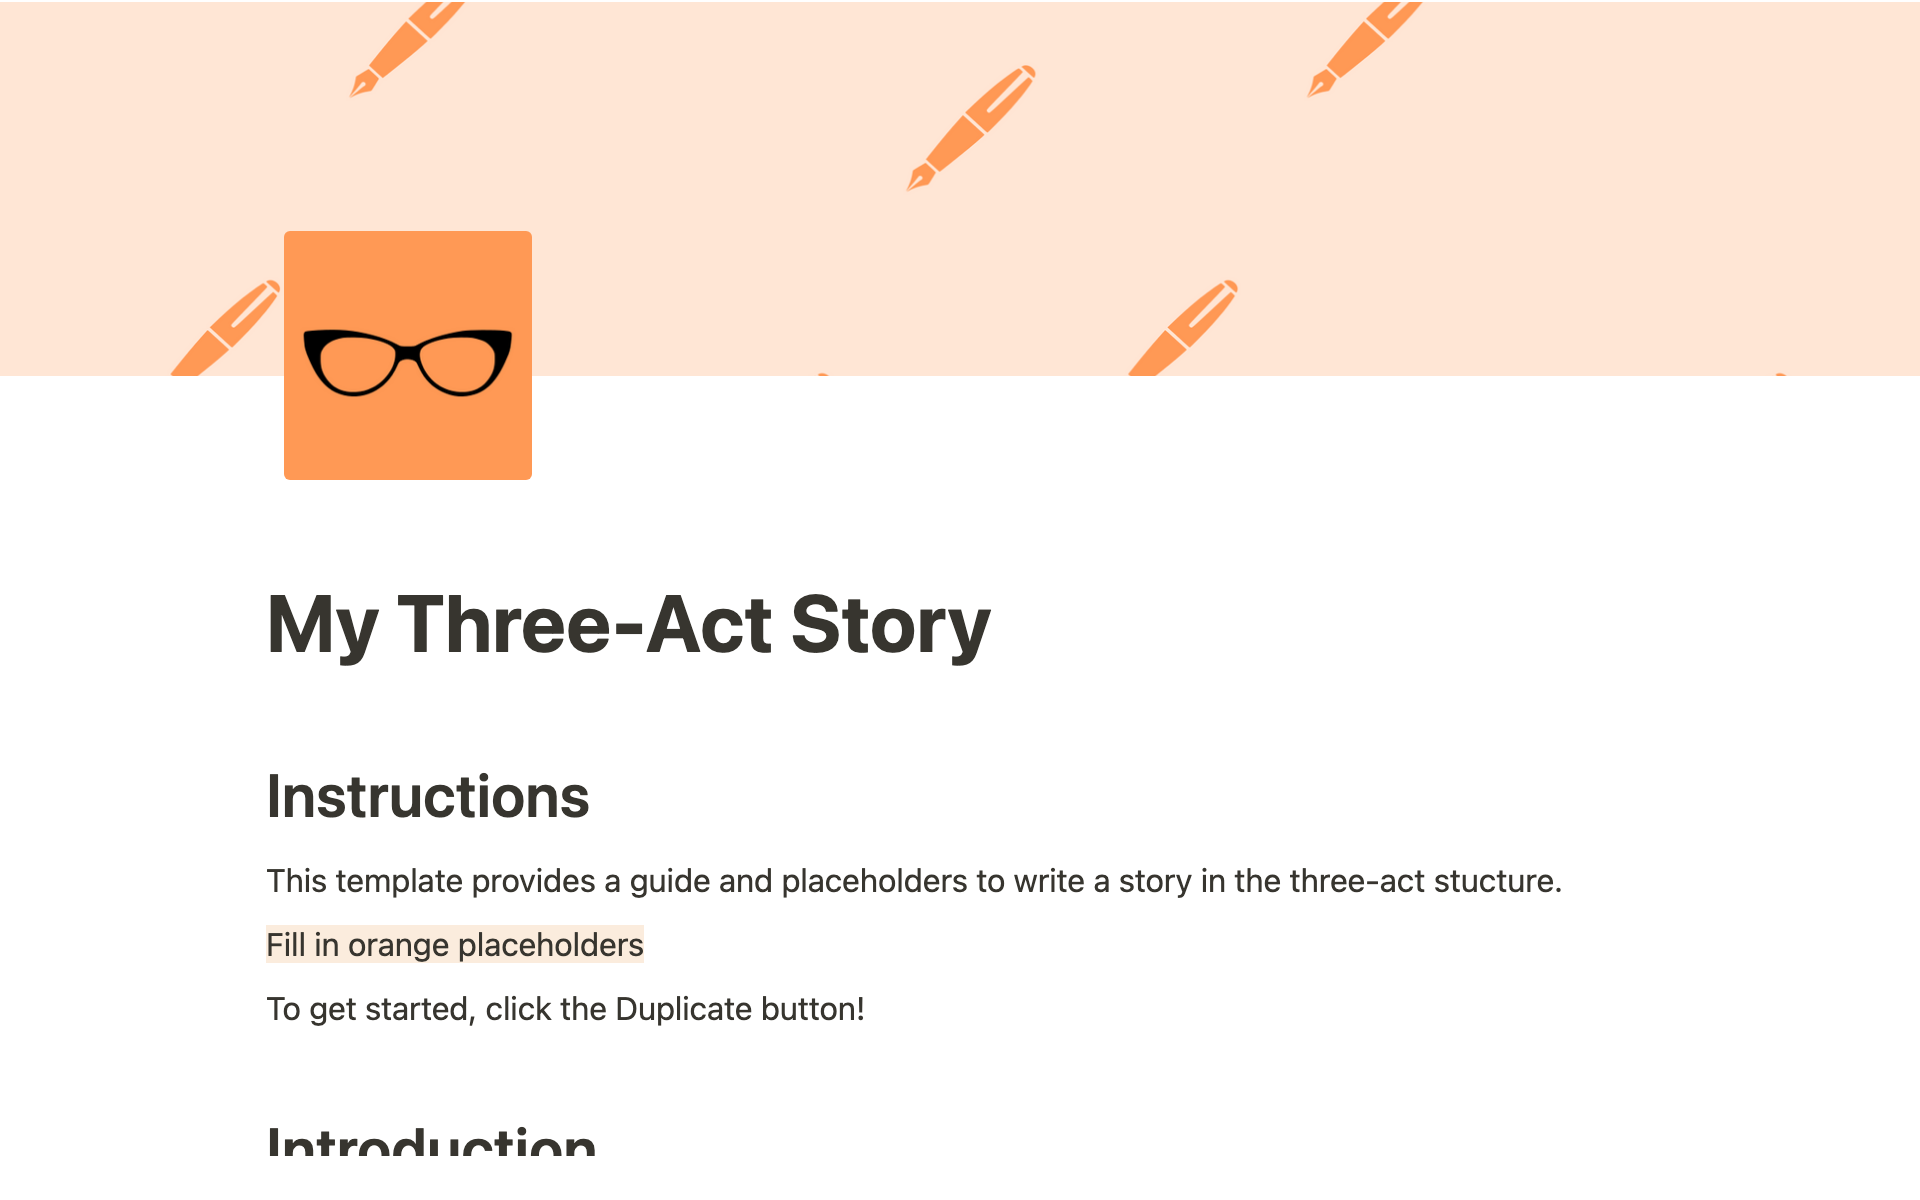 A three-act story template to structure your story, with explanations.